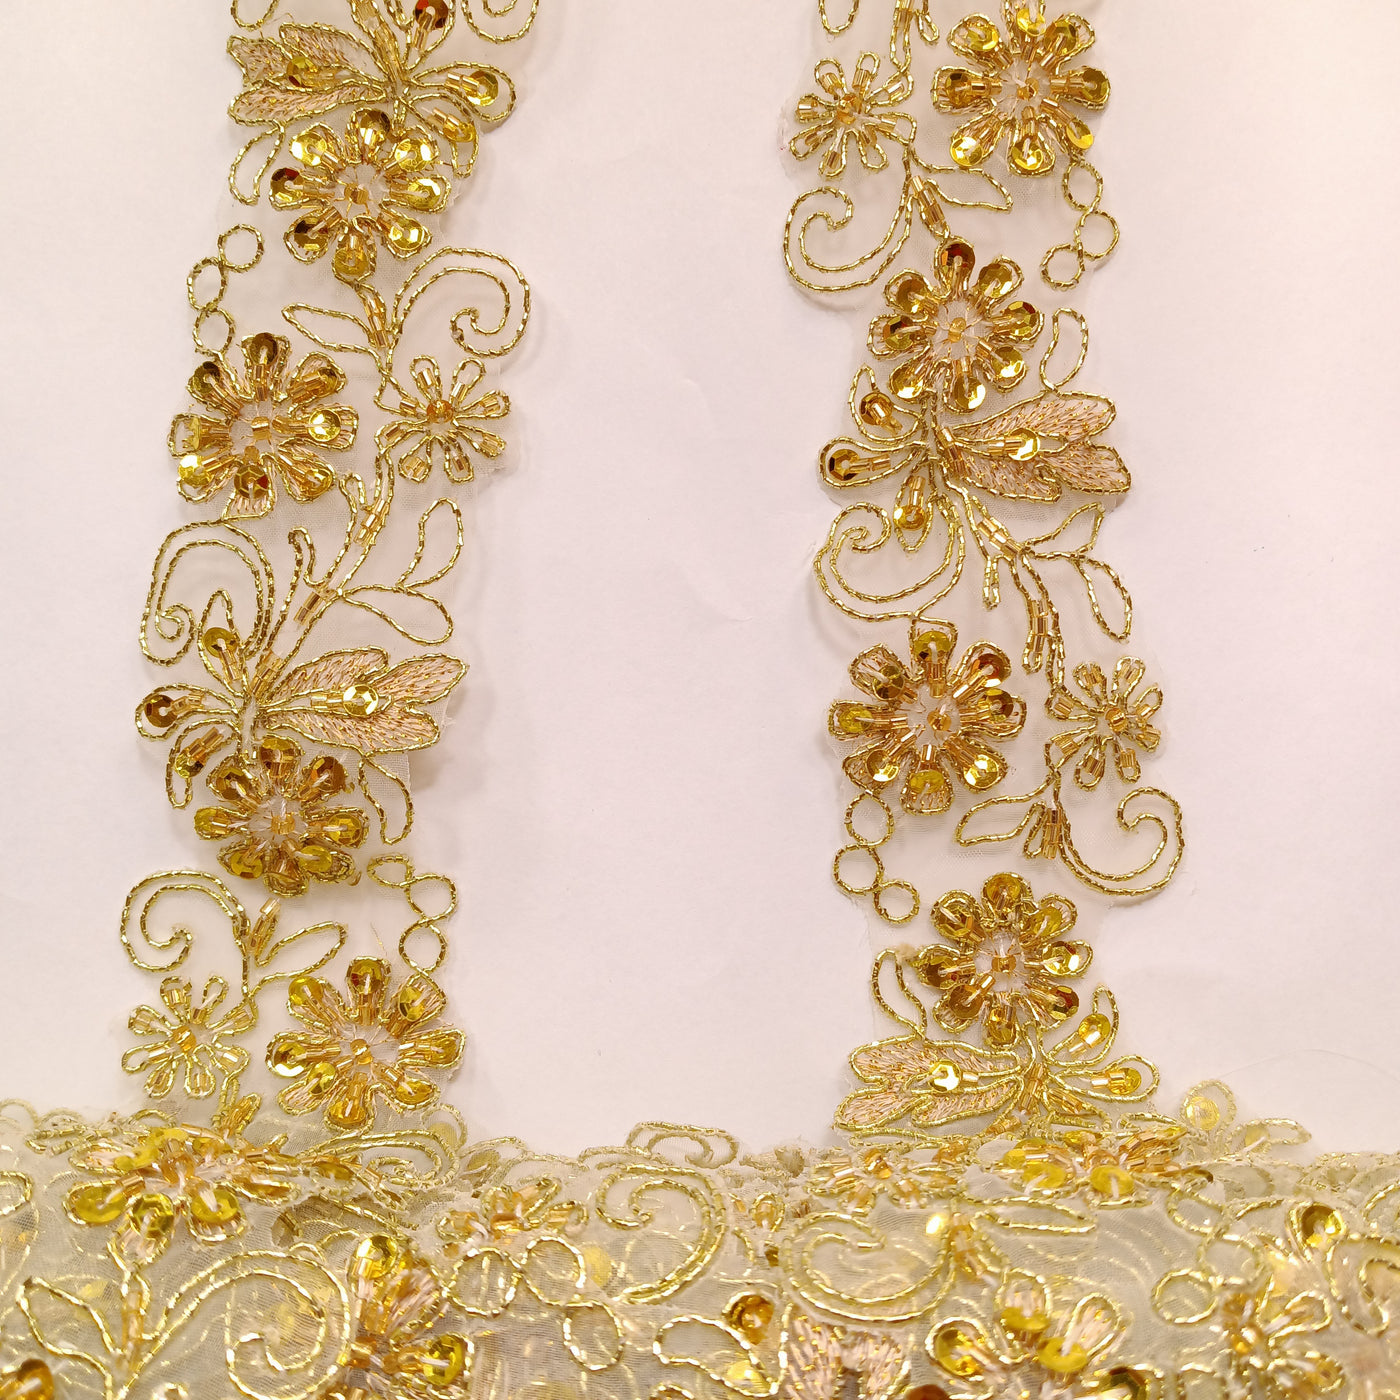 Beaded, Corded & Embroidered on  Organza Metallic Gold Trimming. Lace Usa